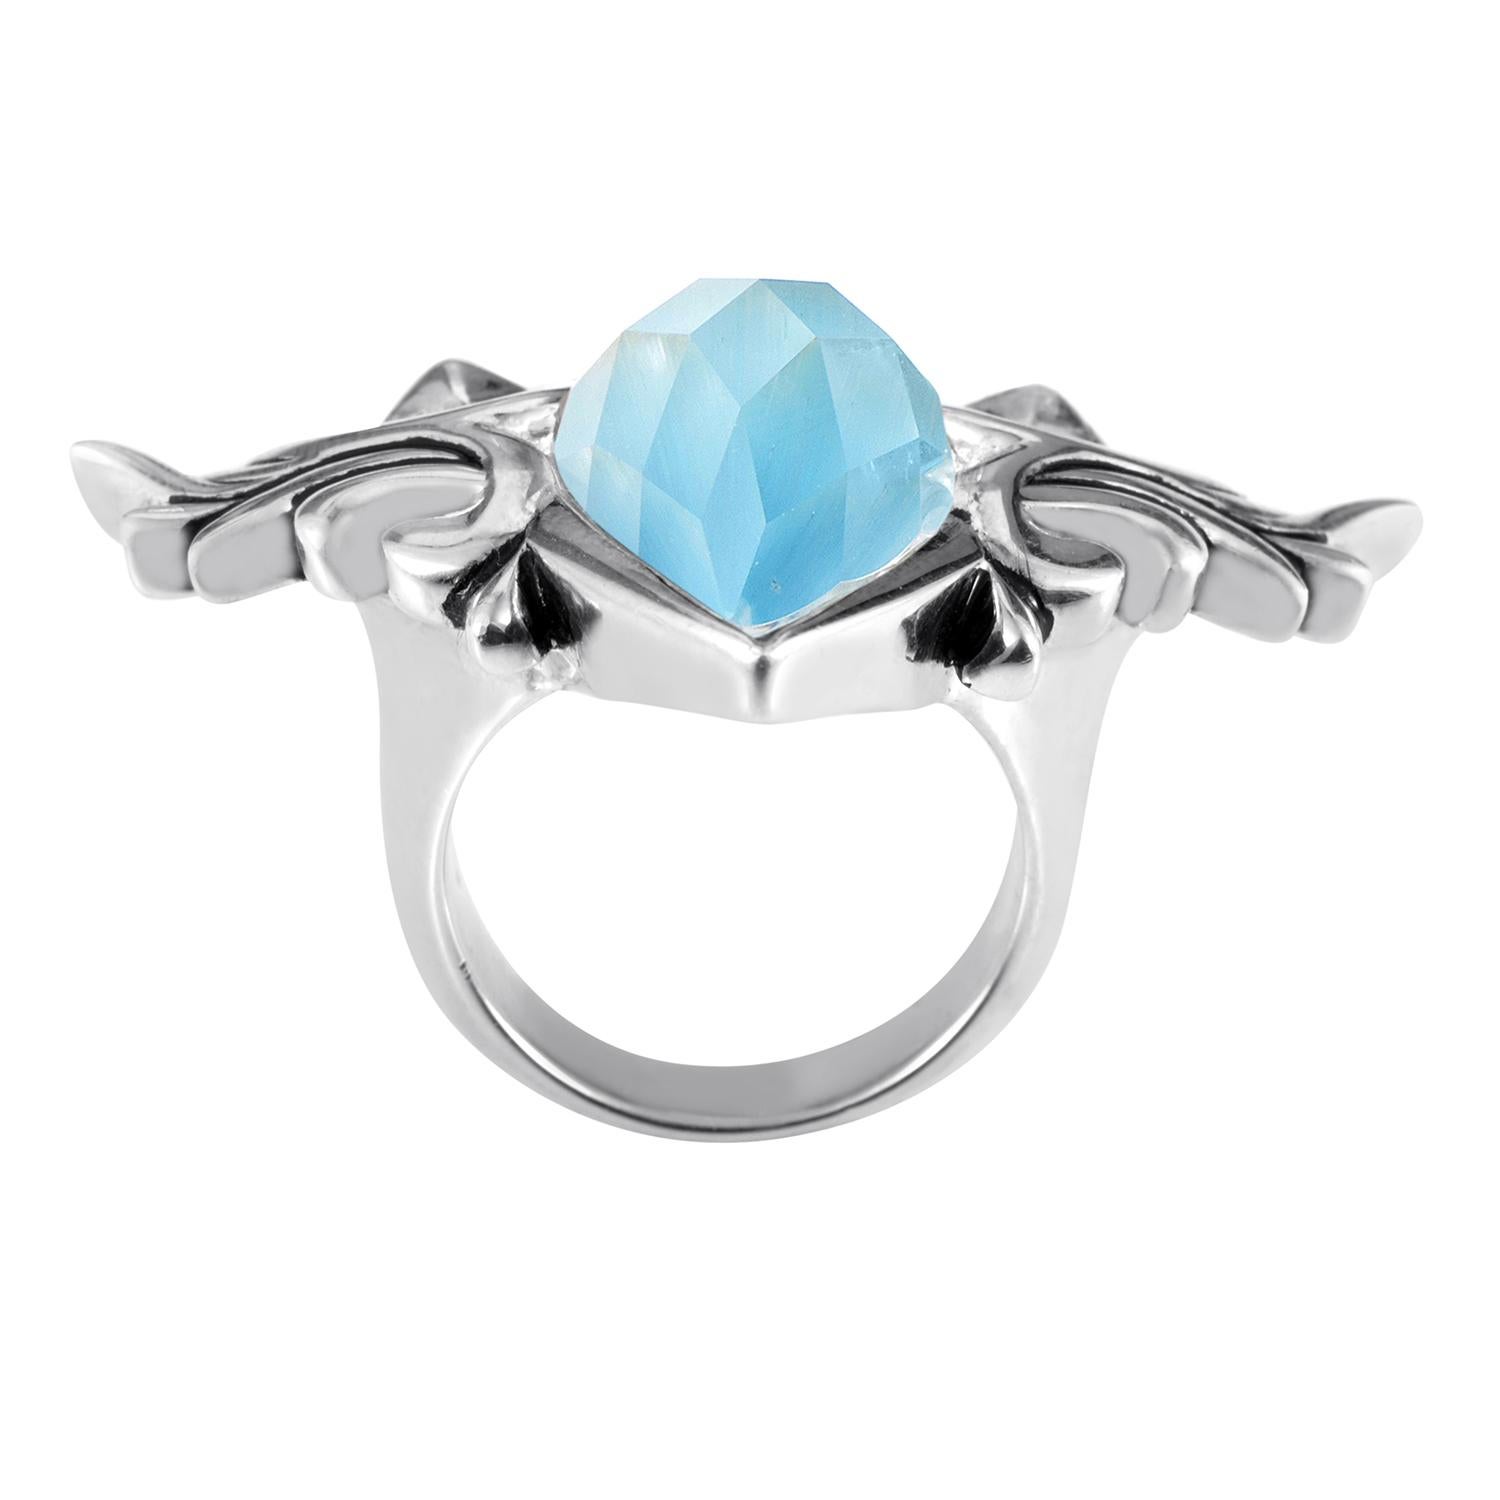 Refreshing with its elegantly beaming tones and eye-catching with its exquisite embellishment, this spectacular sterling silver multi-gemstone ring from Stephen Webster is an absolutely fascinating addition to the Superstud Baroque collection,